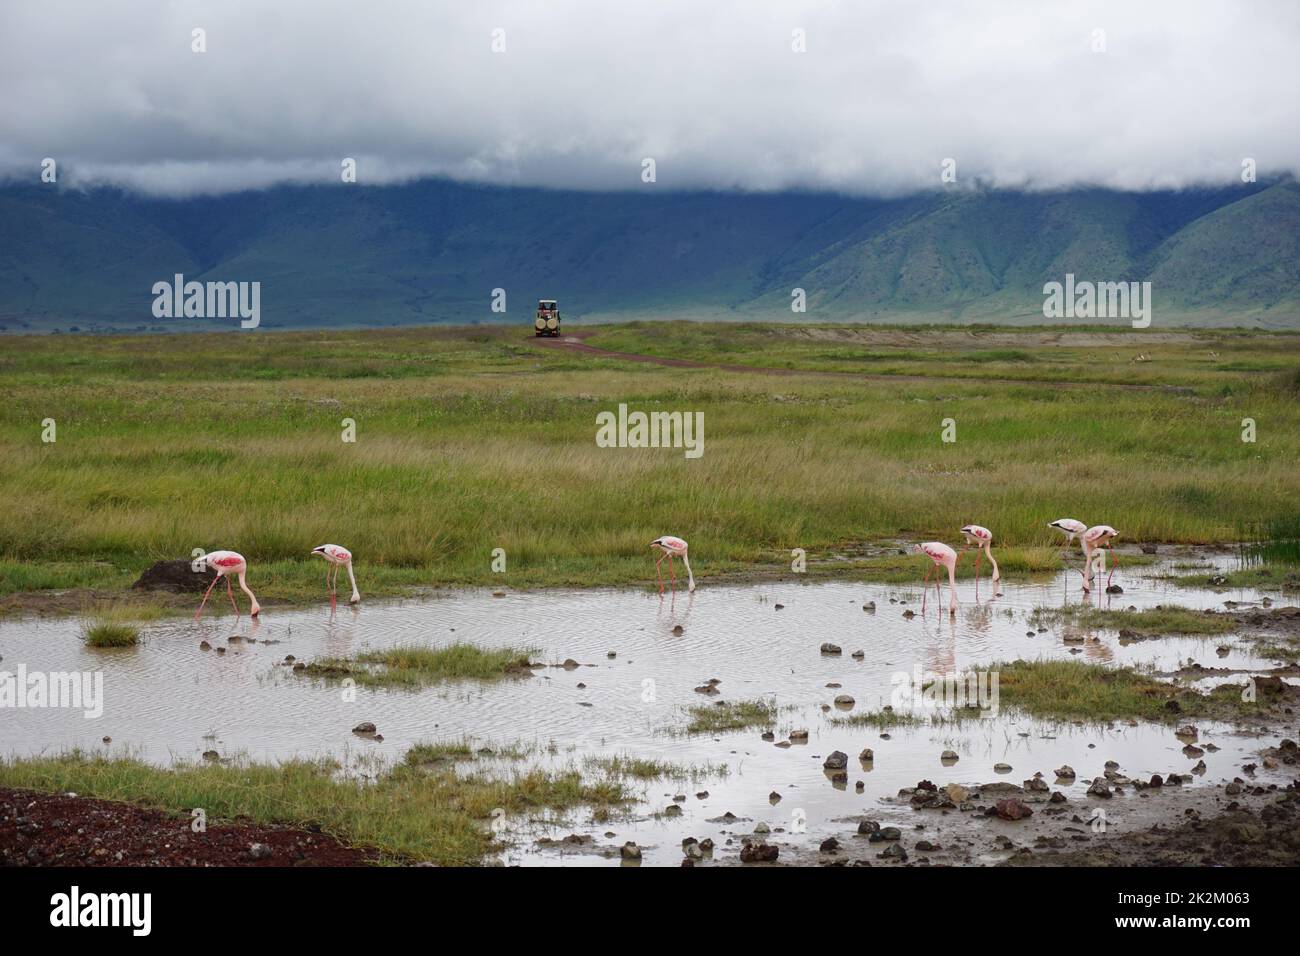 Group of flamingos standing in the water with 4x4 in the background, Norongoro Stock Photo